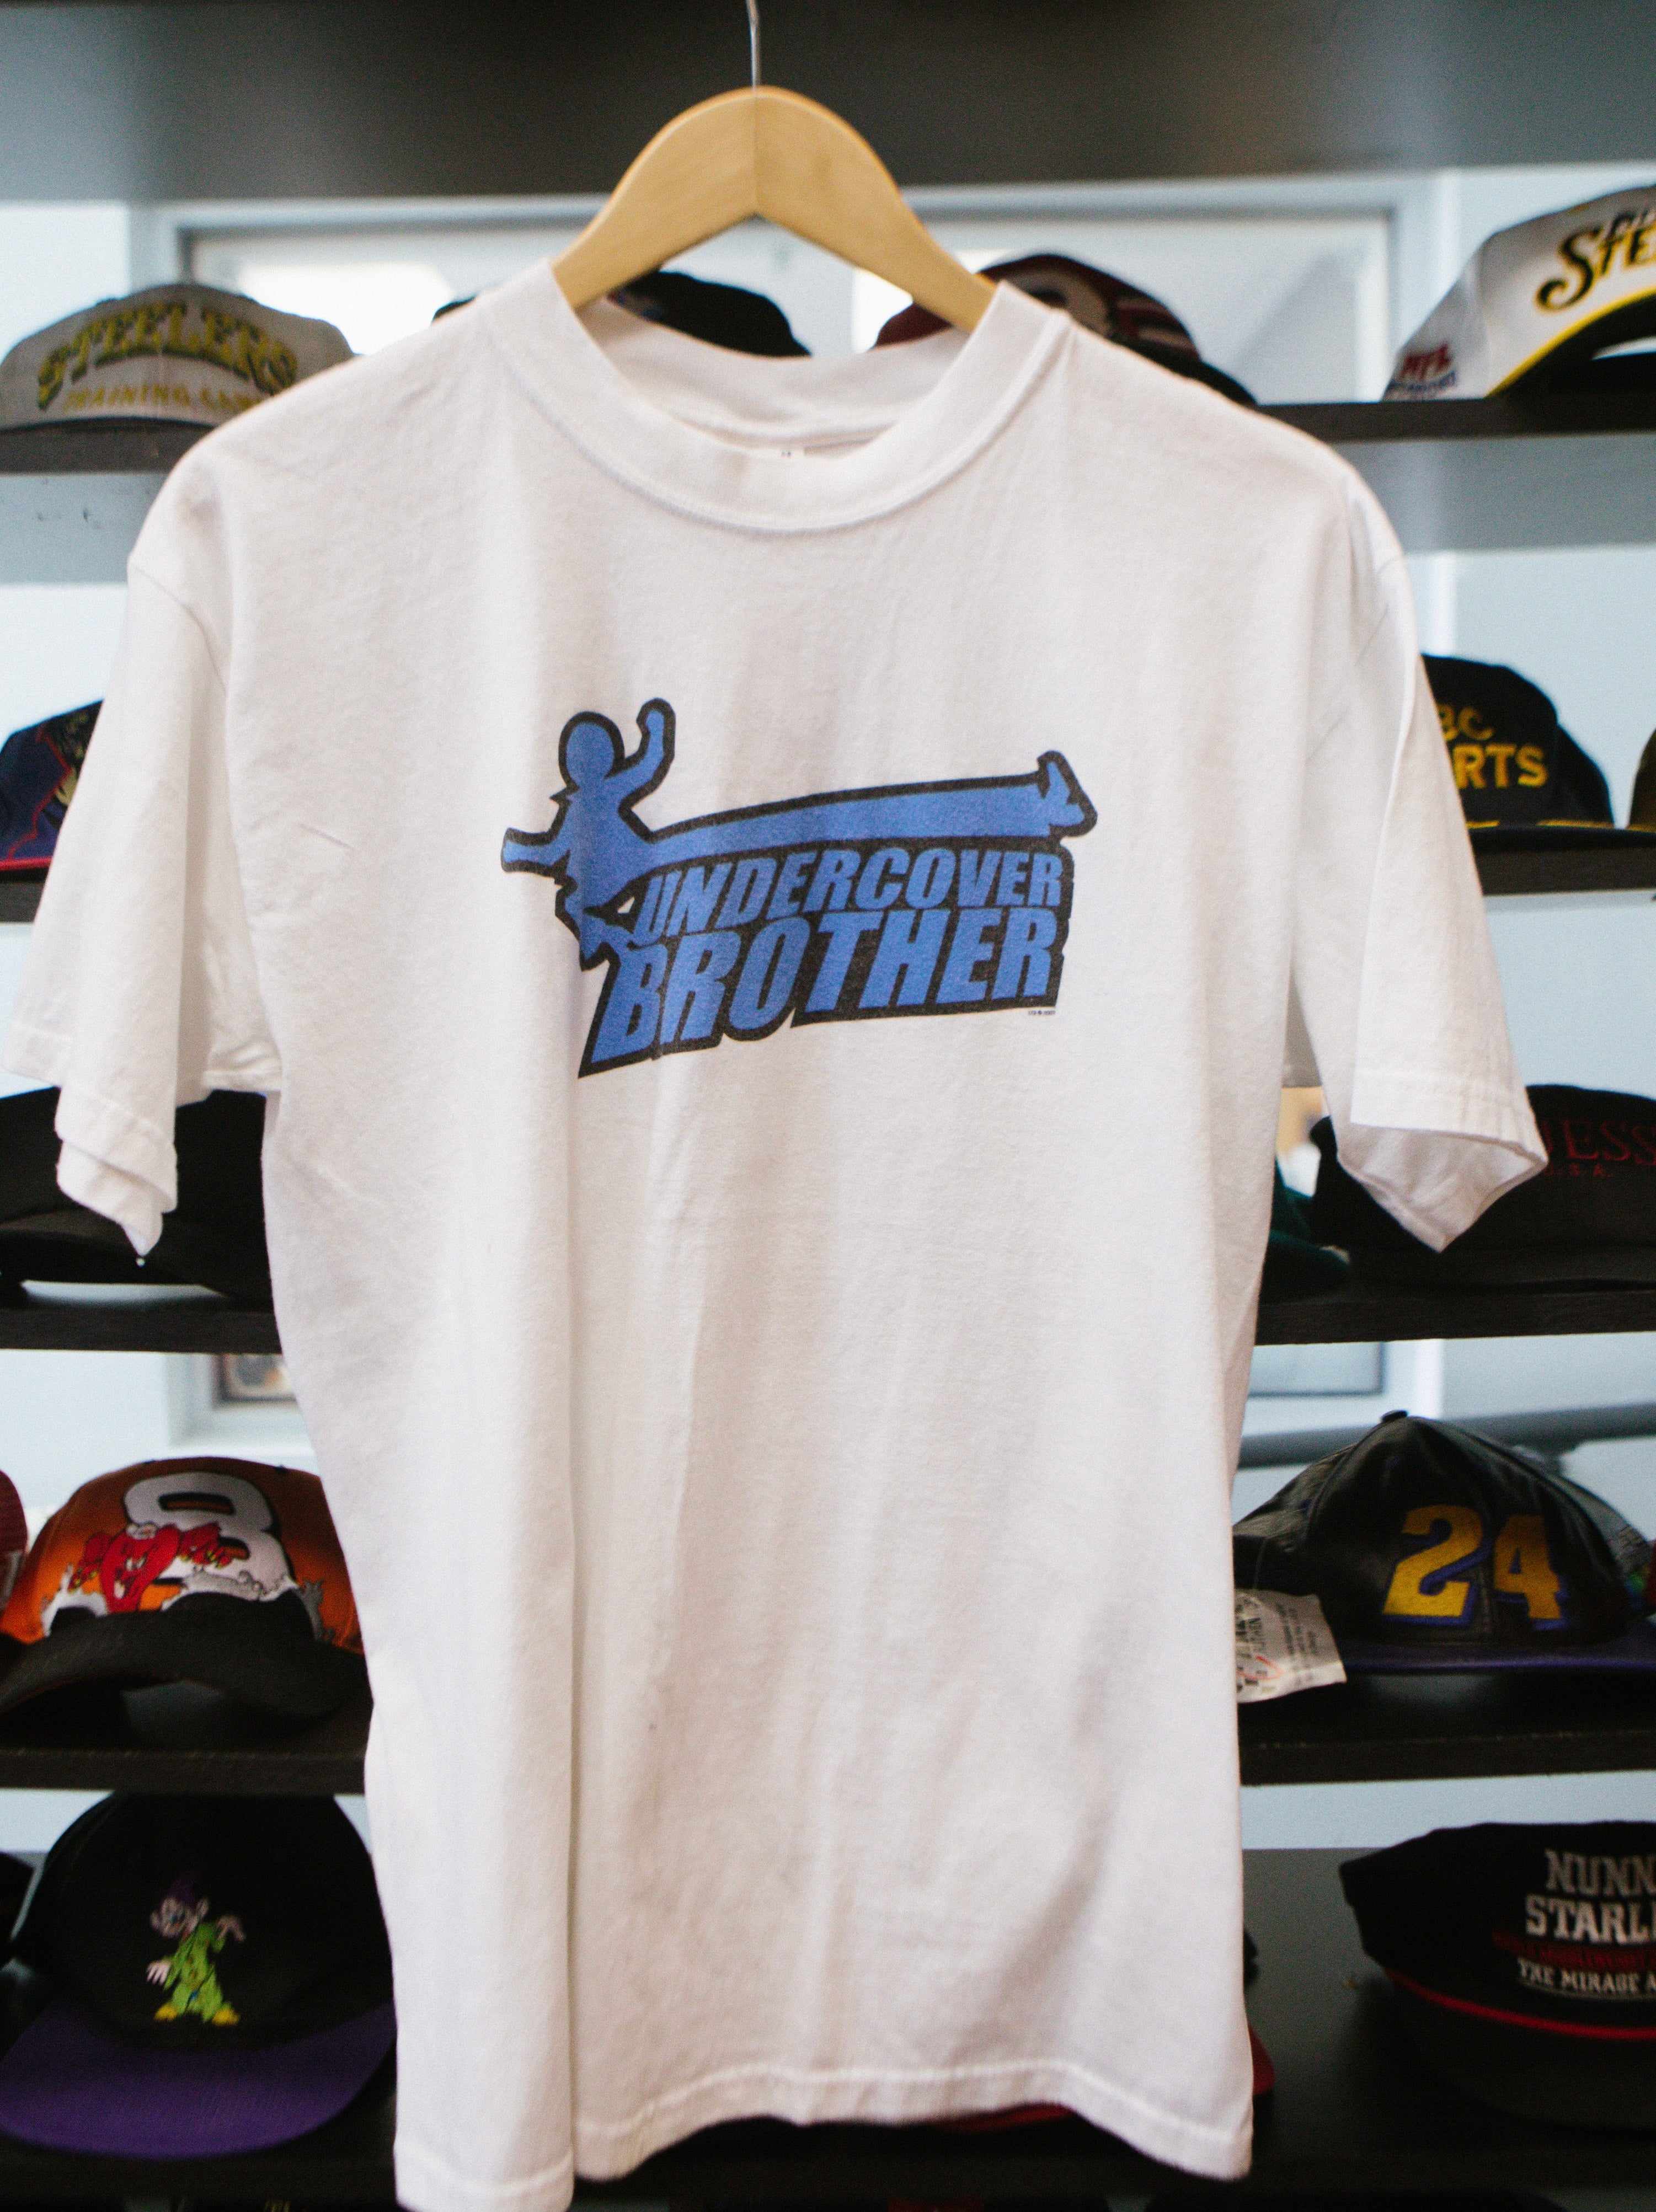 Undercover Brother Promo Tee